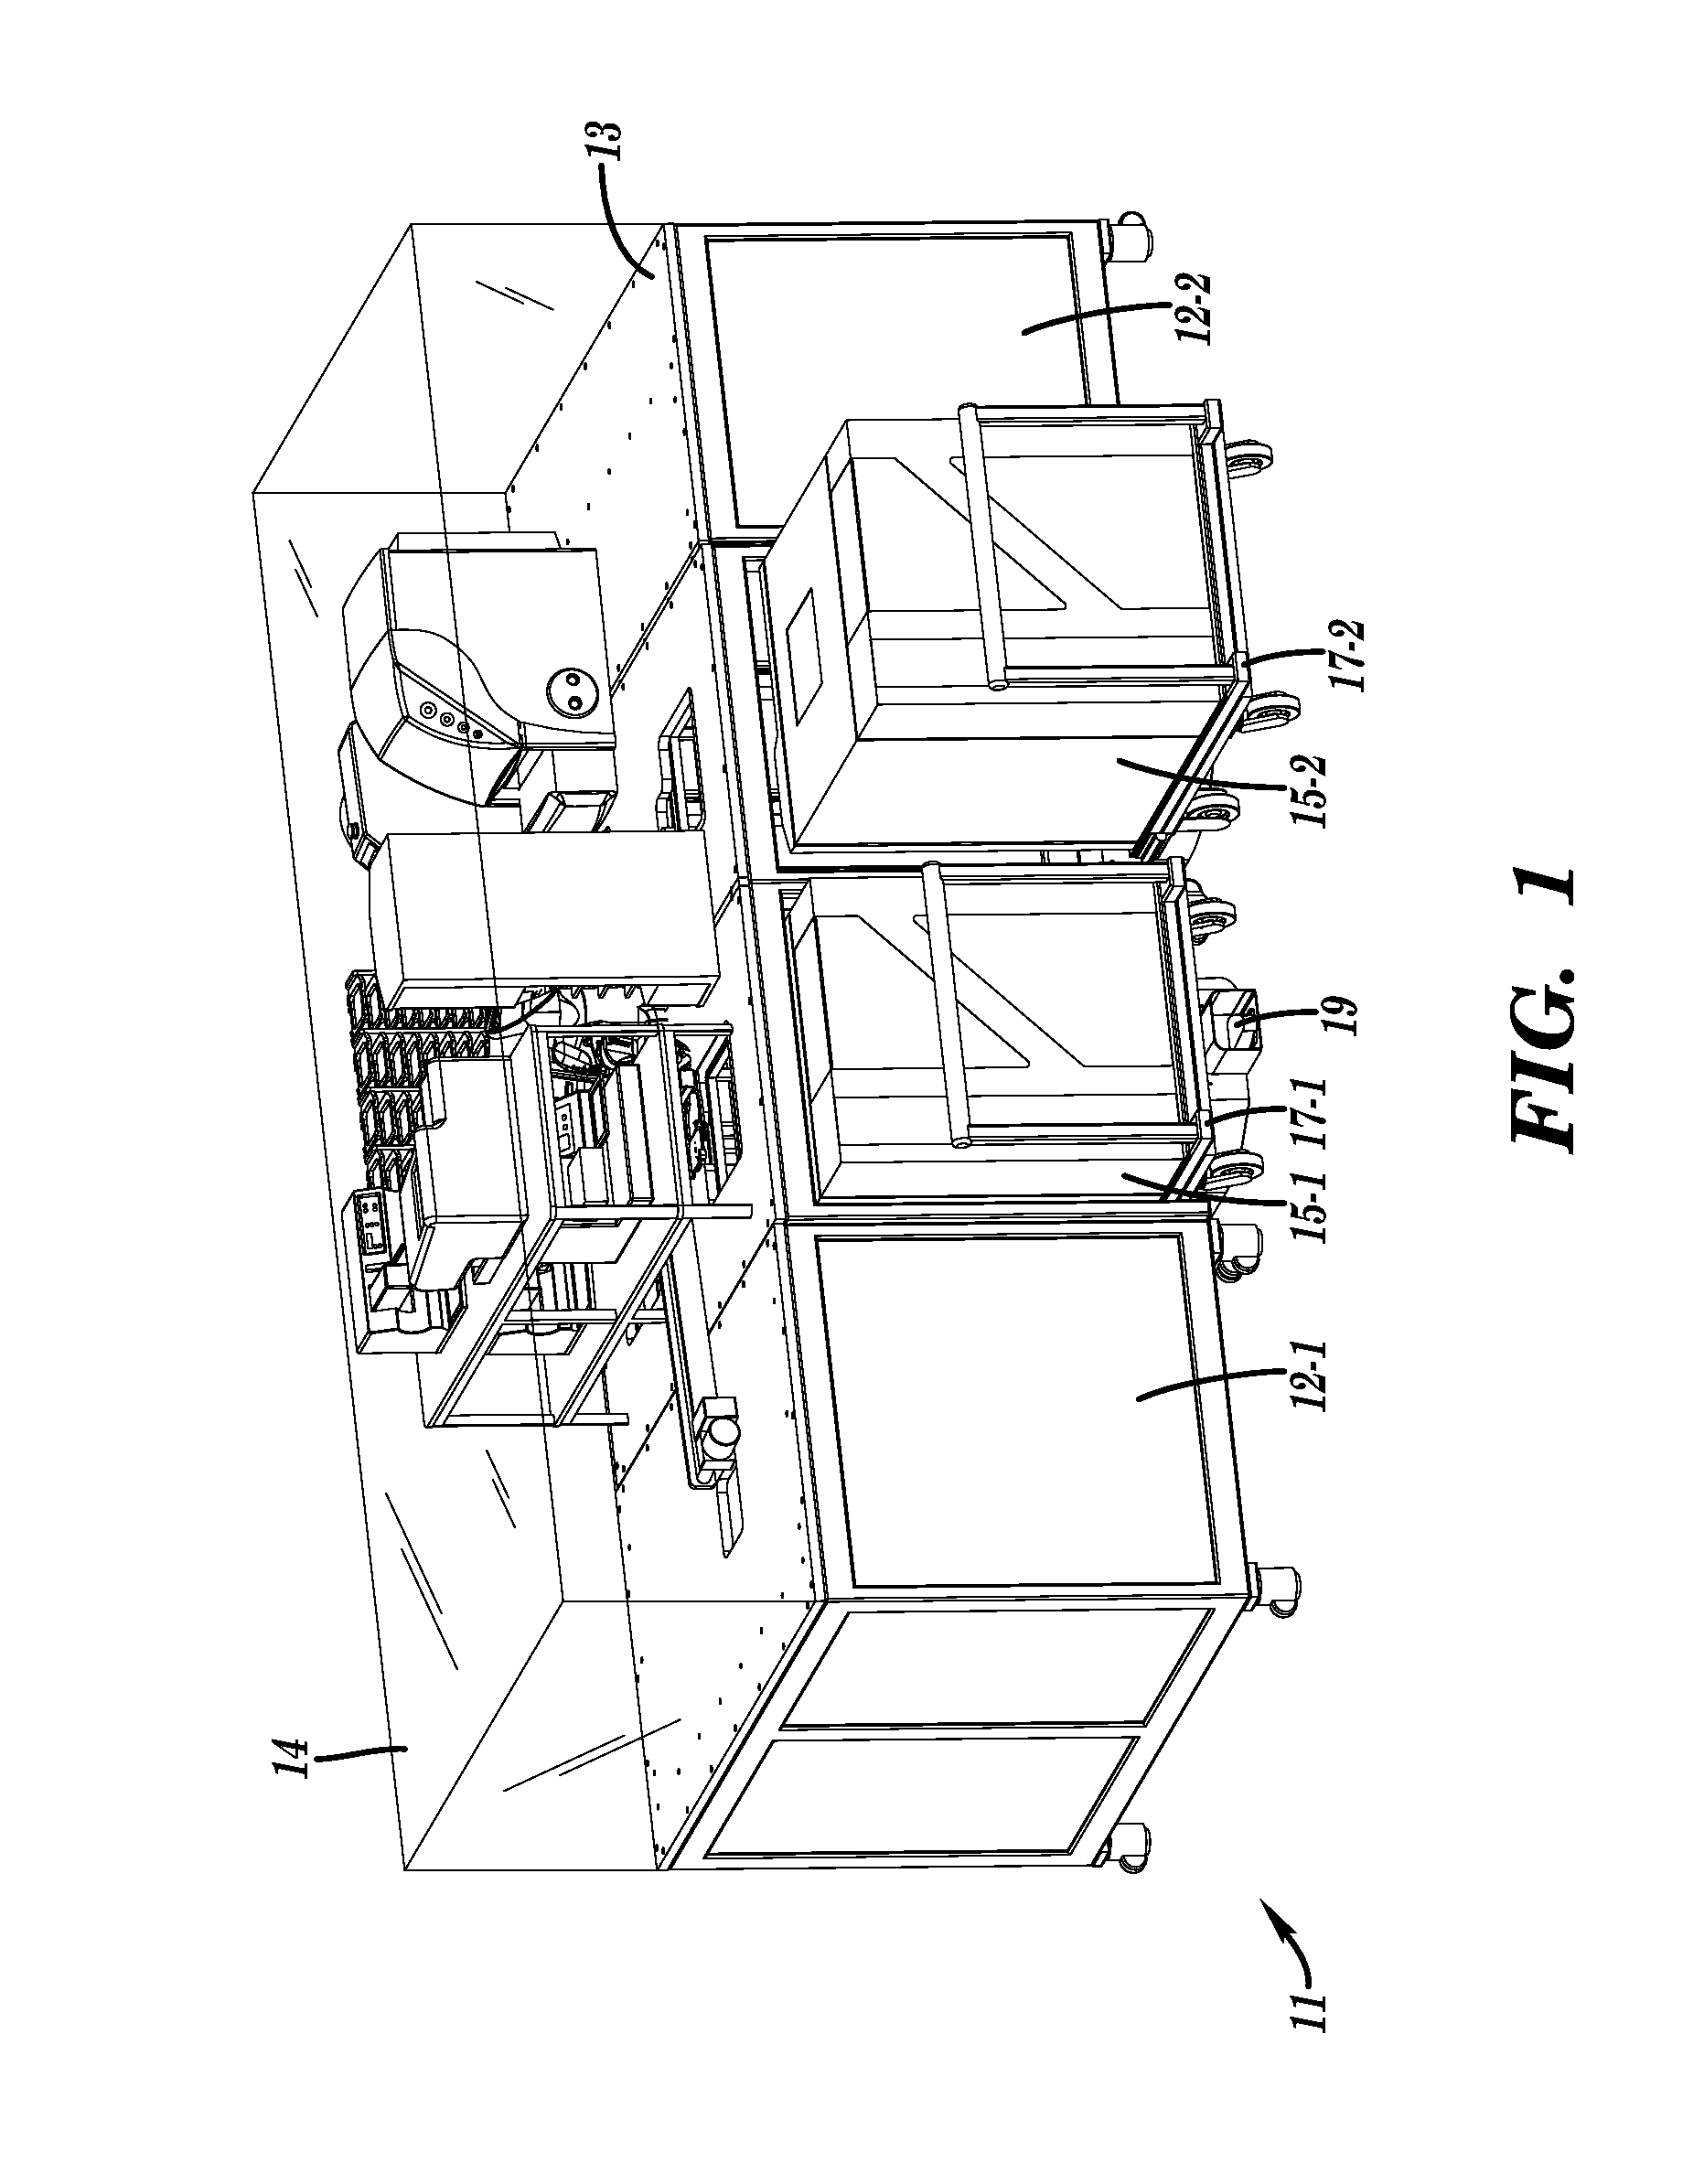 Instrument docking station for an automated testing system